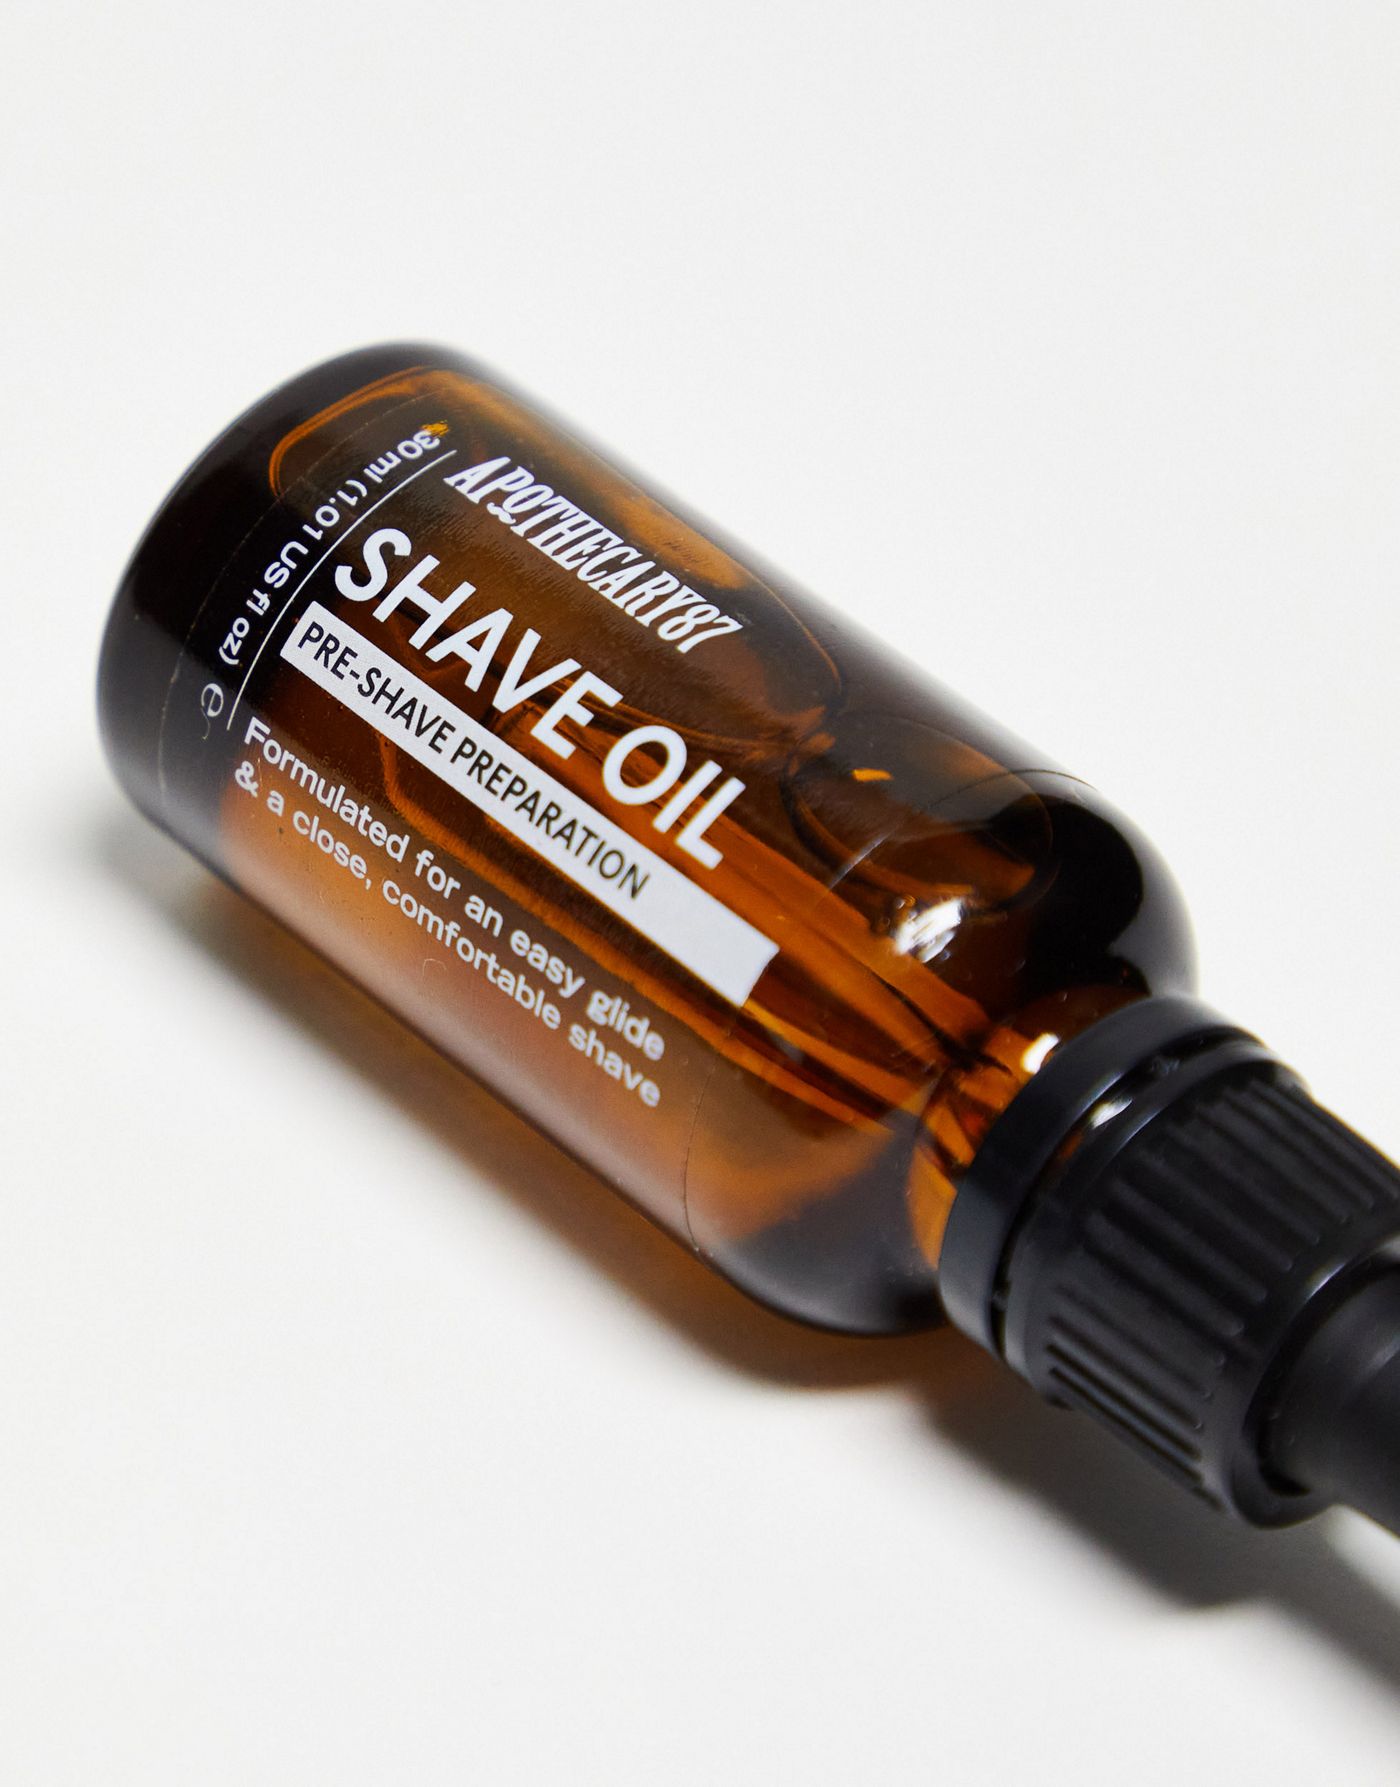 Apothecary 87 Shave Oil